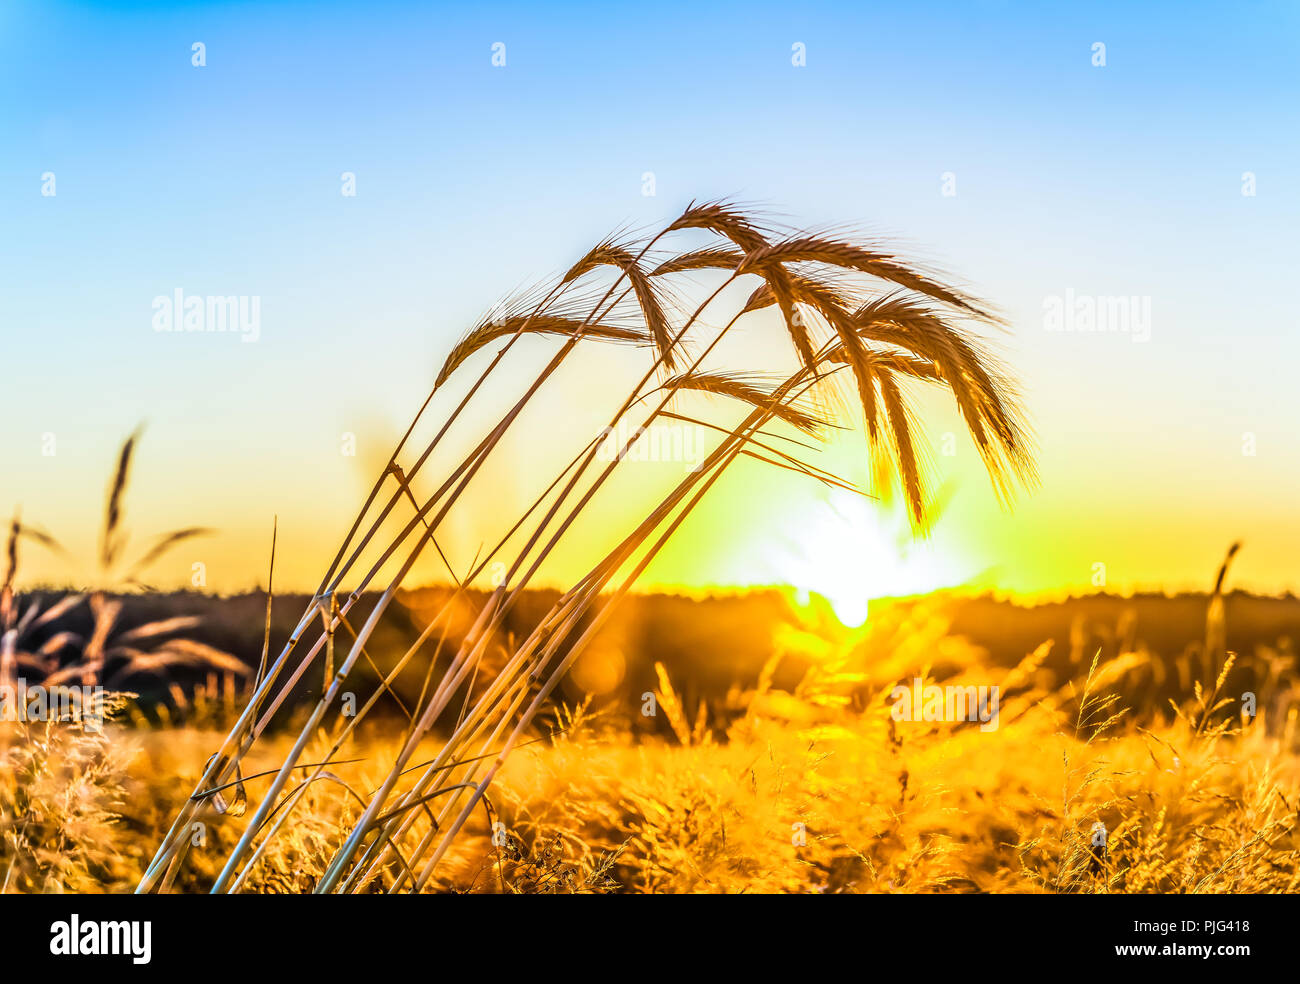 Beautiful nature sunrise landscape. Ears of golden wheat close up. Rural scene under sunlight. Summer background of ripening ears of agriculture lands Stock Photo